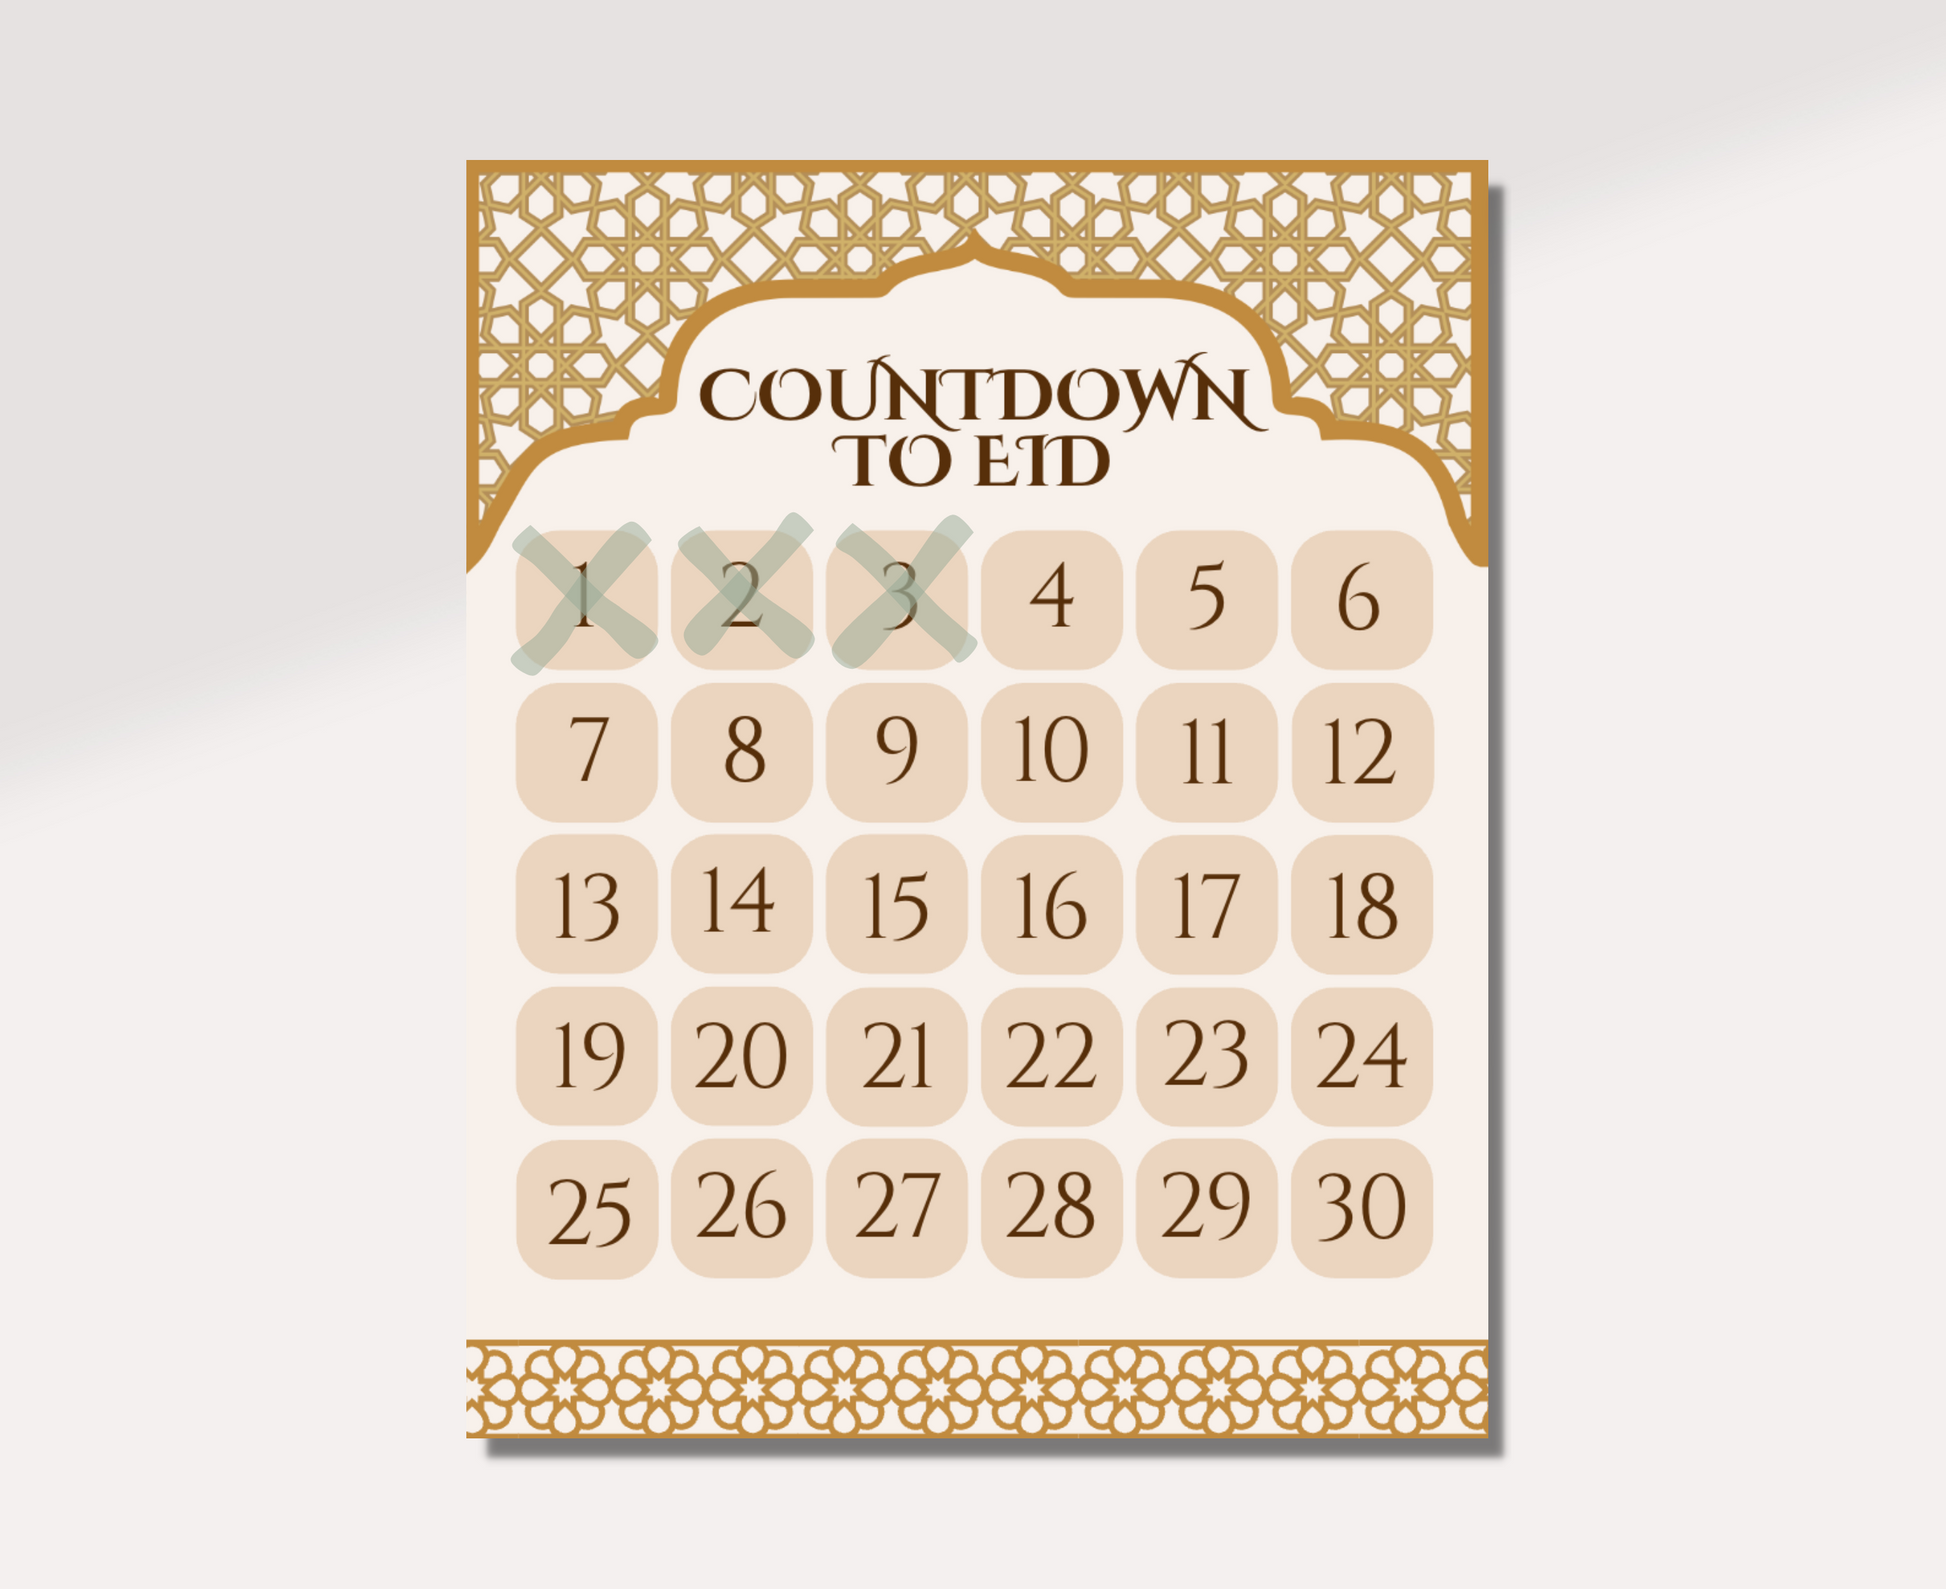 Countdown to Eid print with Days 1, 2, and 3 crossed out in green.